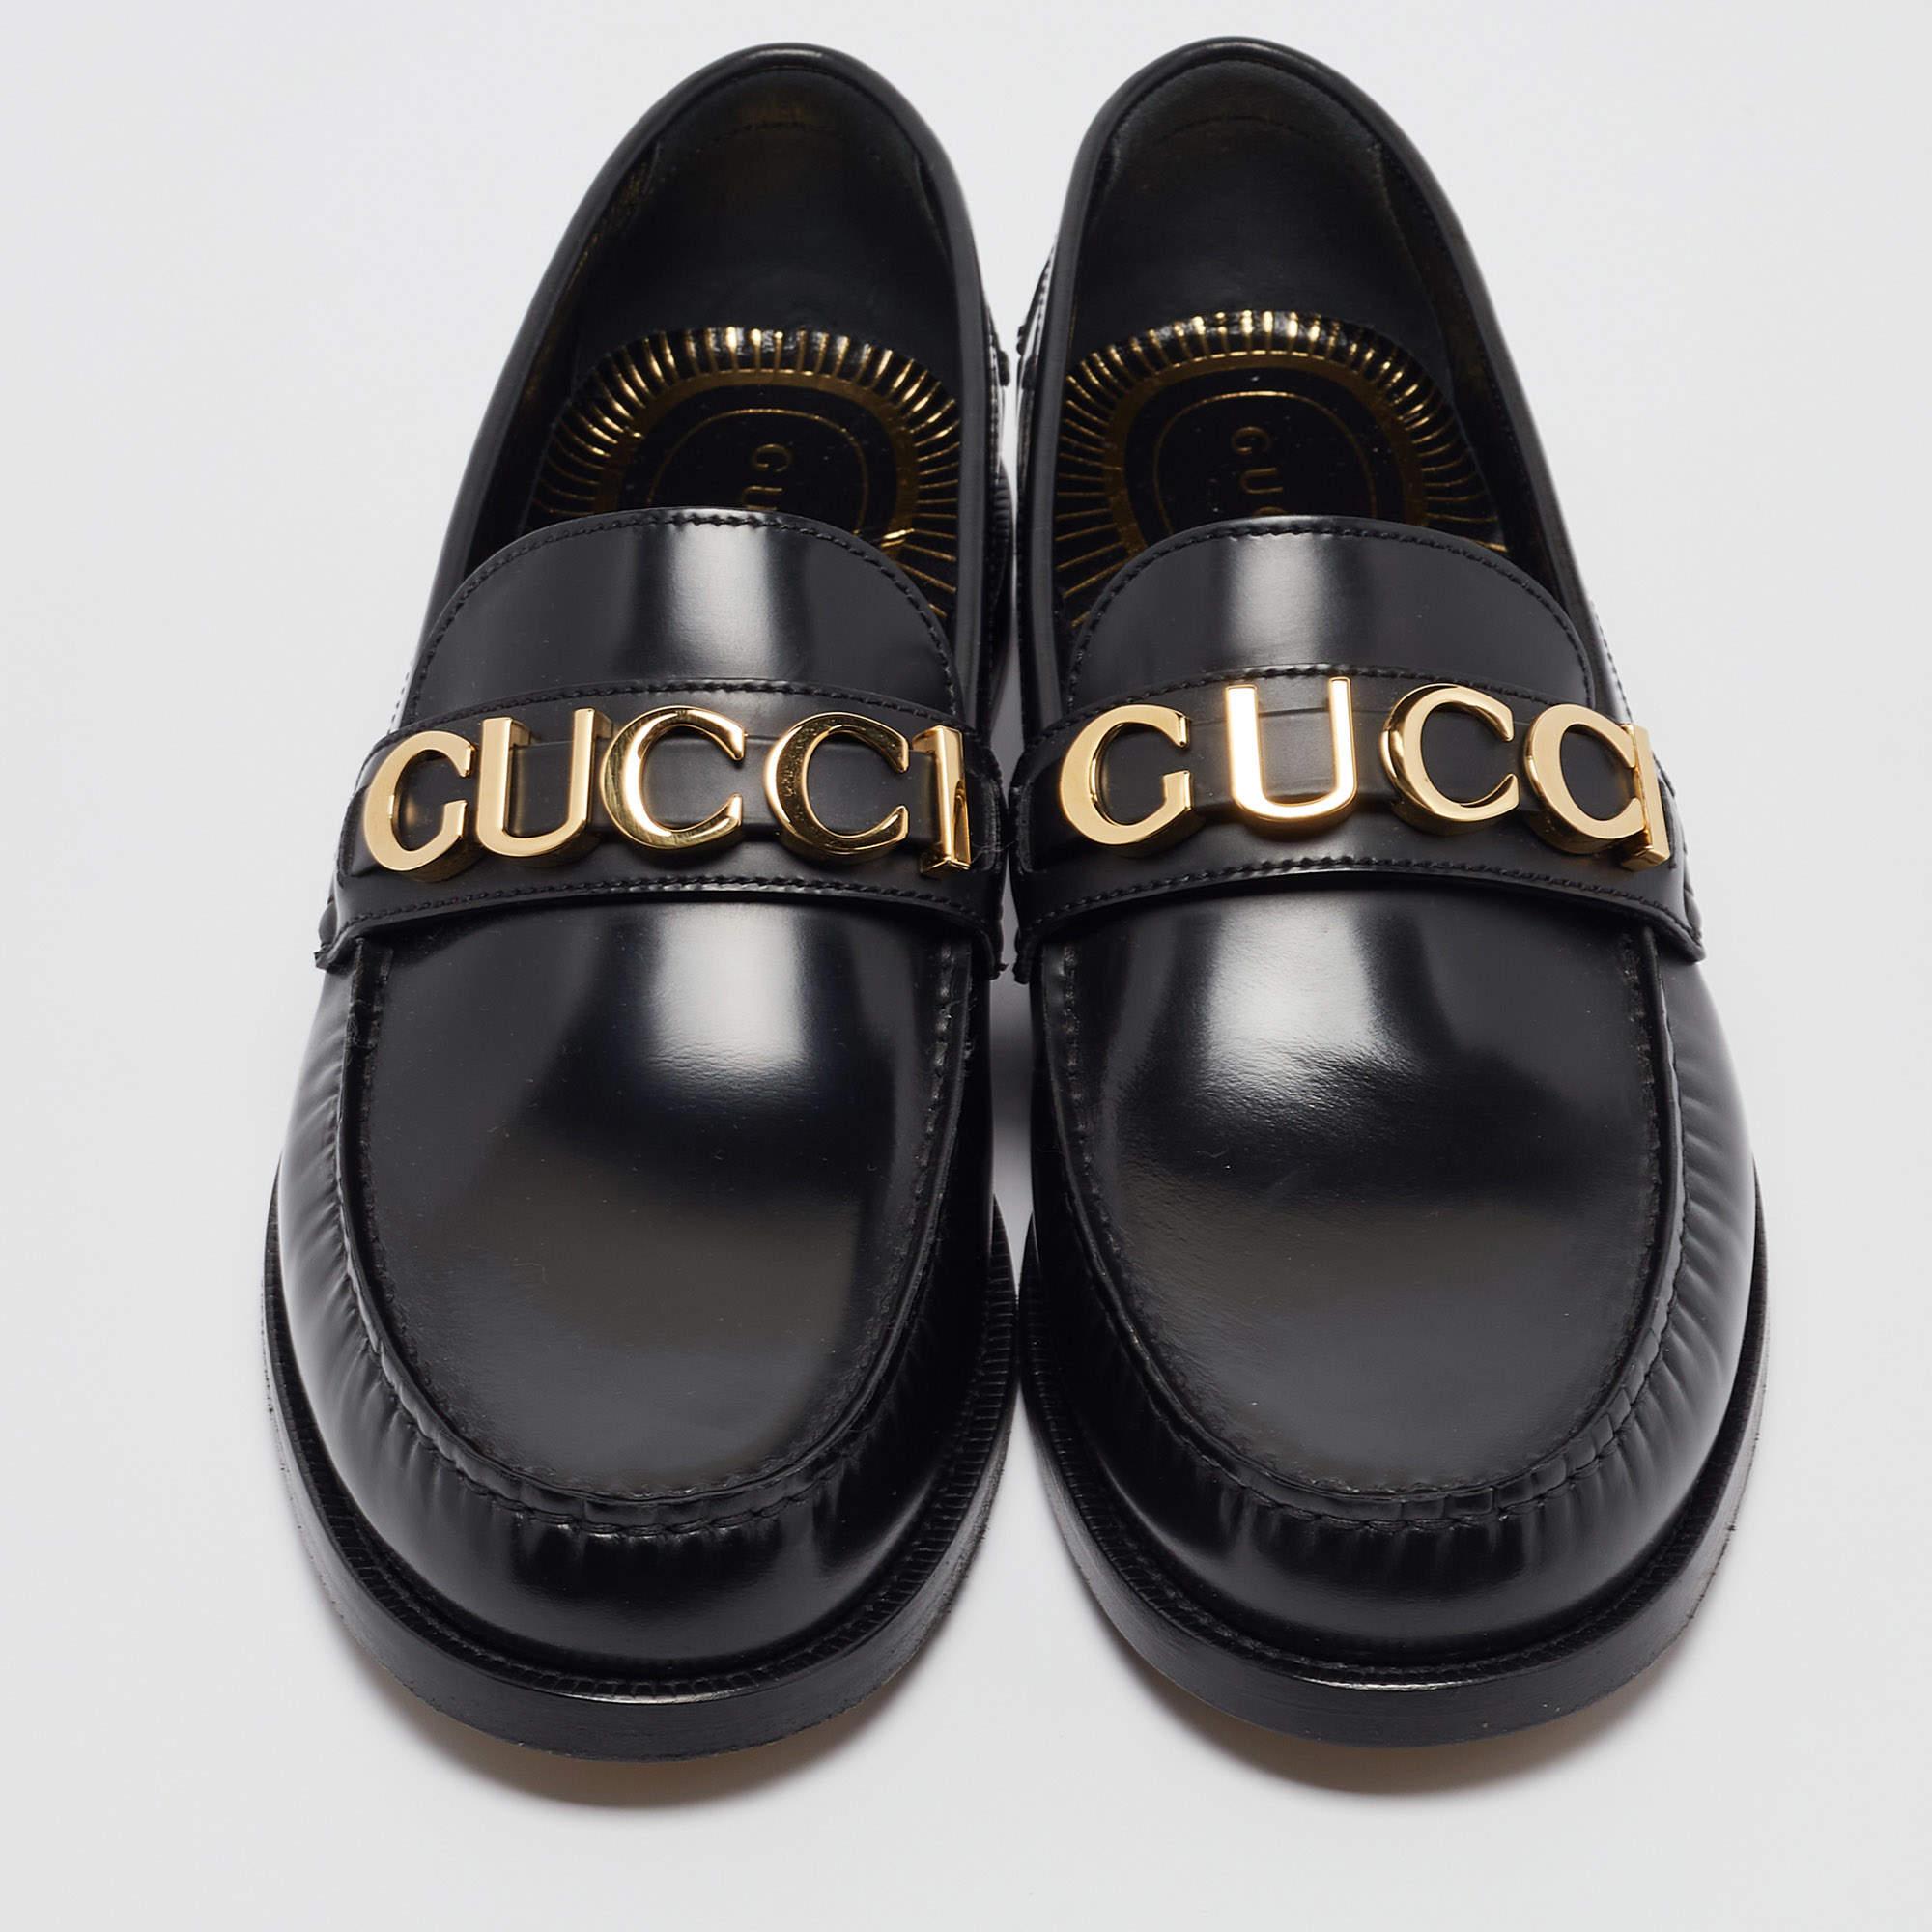 Gucci's Cara loafers exude sophistication and style. Crafted from premium black leather, these loafers feature the logo embellishment, adding a touch of glamor. With a sleek design and impeccable craftsmanship, they effortlessly merge luxury and